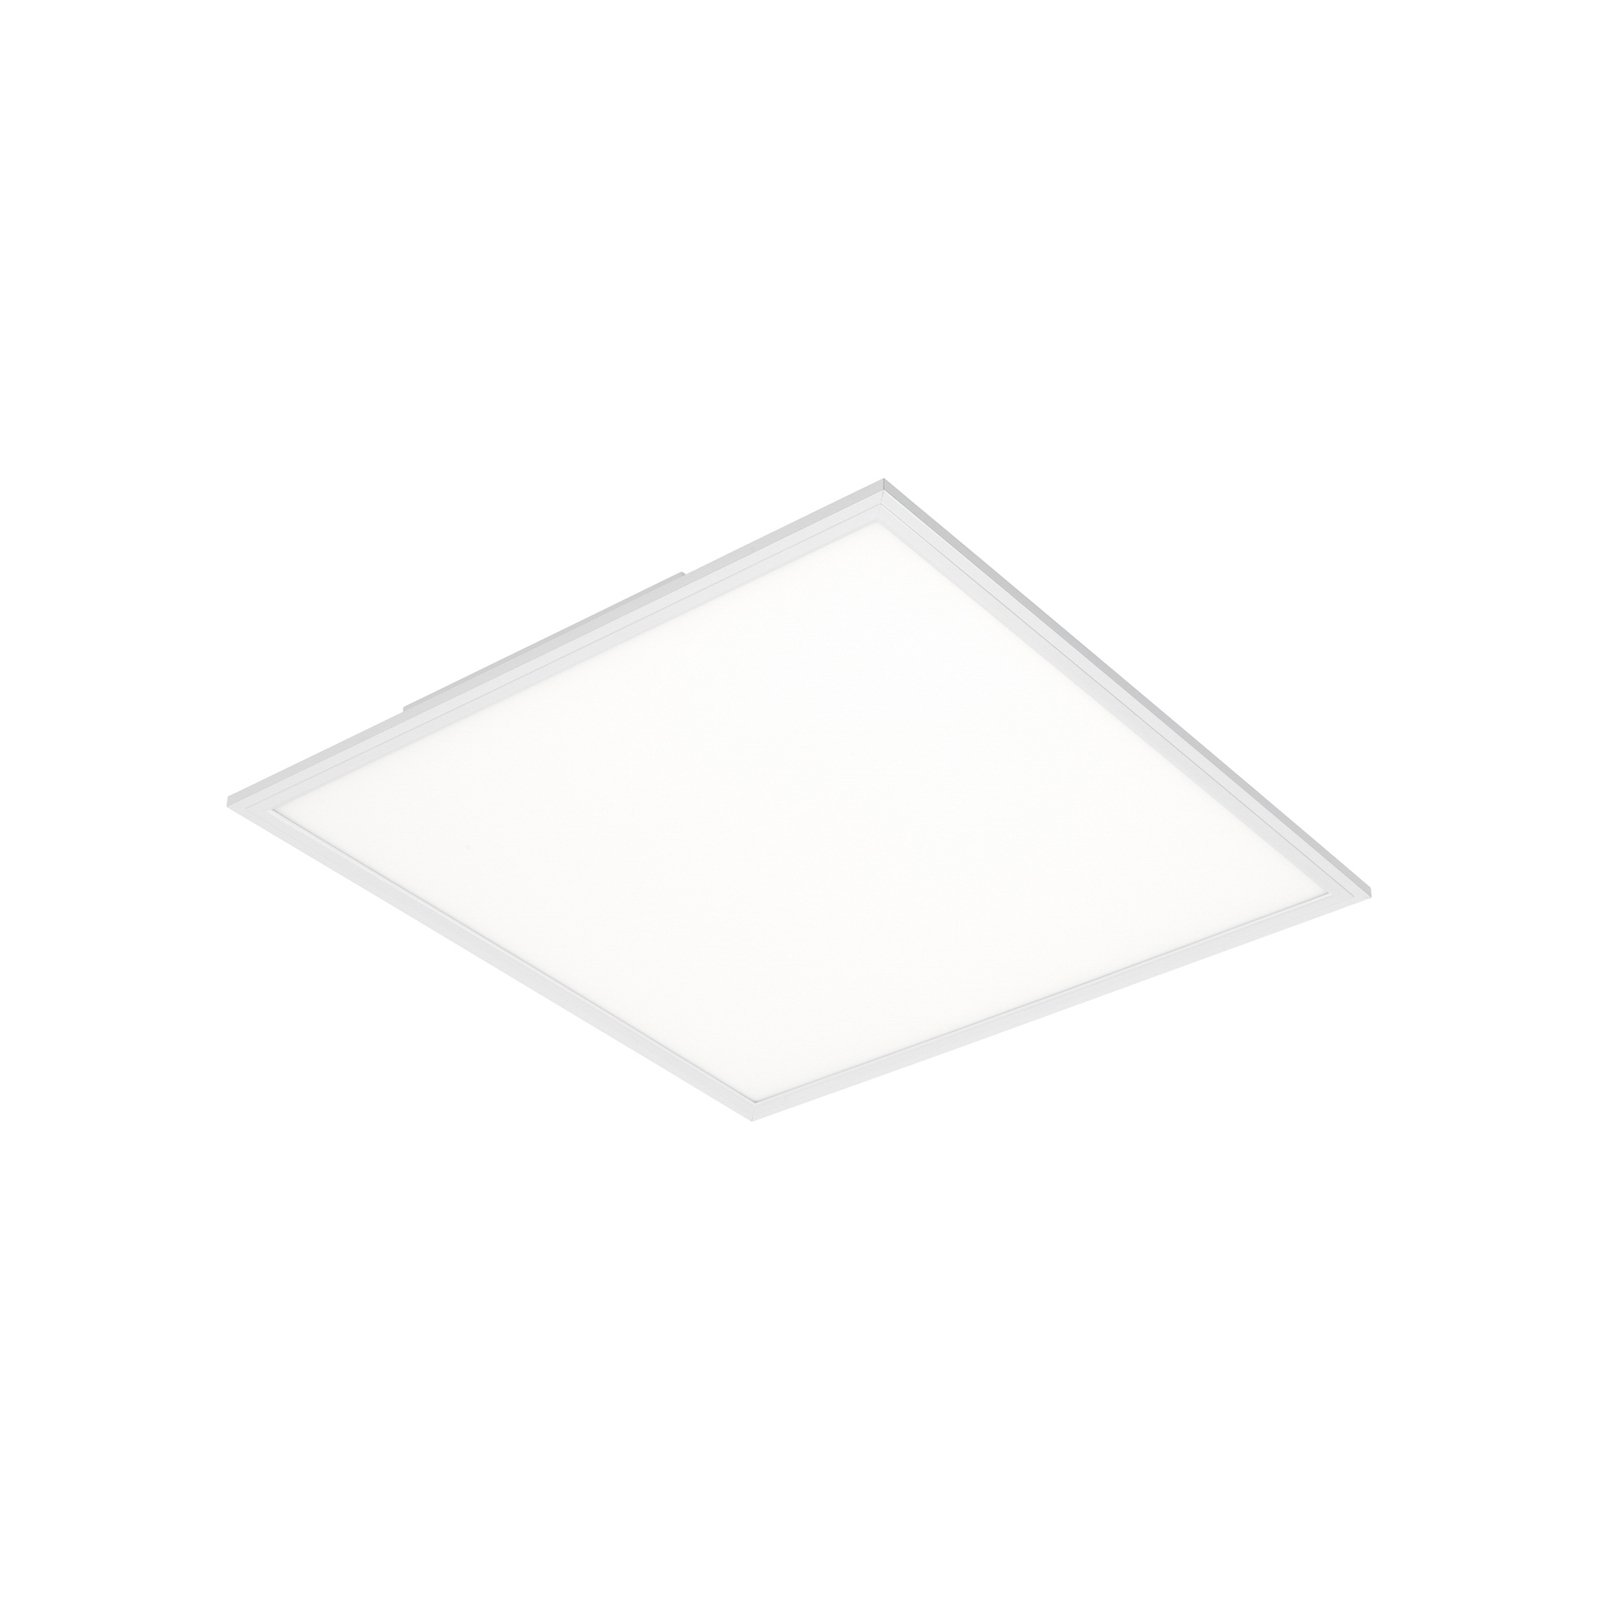 Painel LED Branco simples, ultra-plano, 59,5x59,5 cm